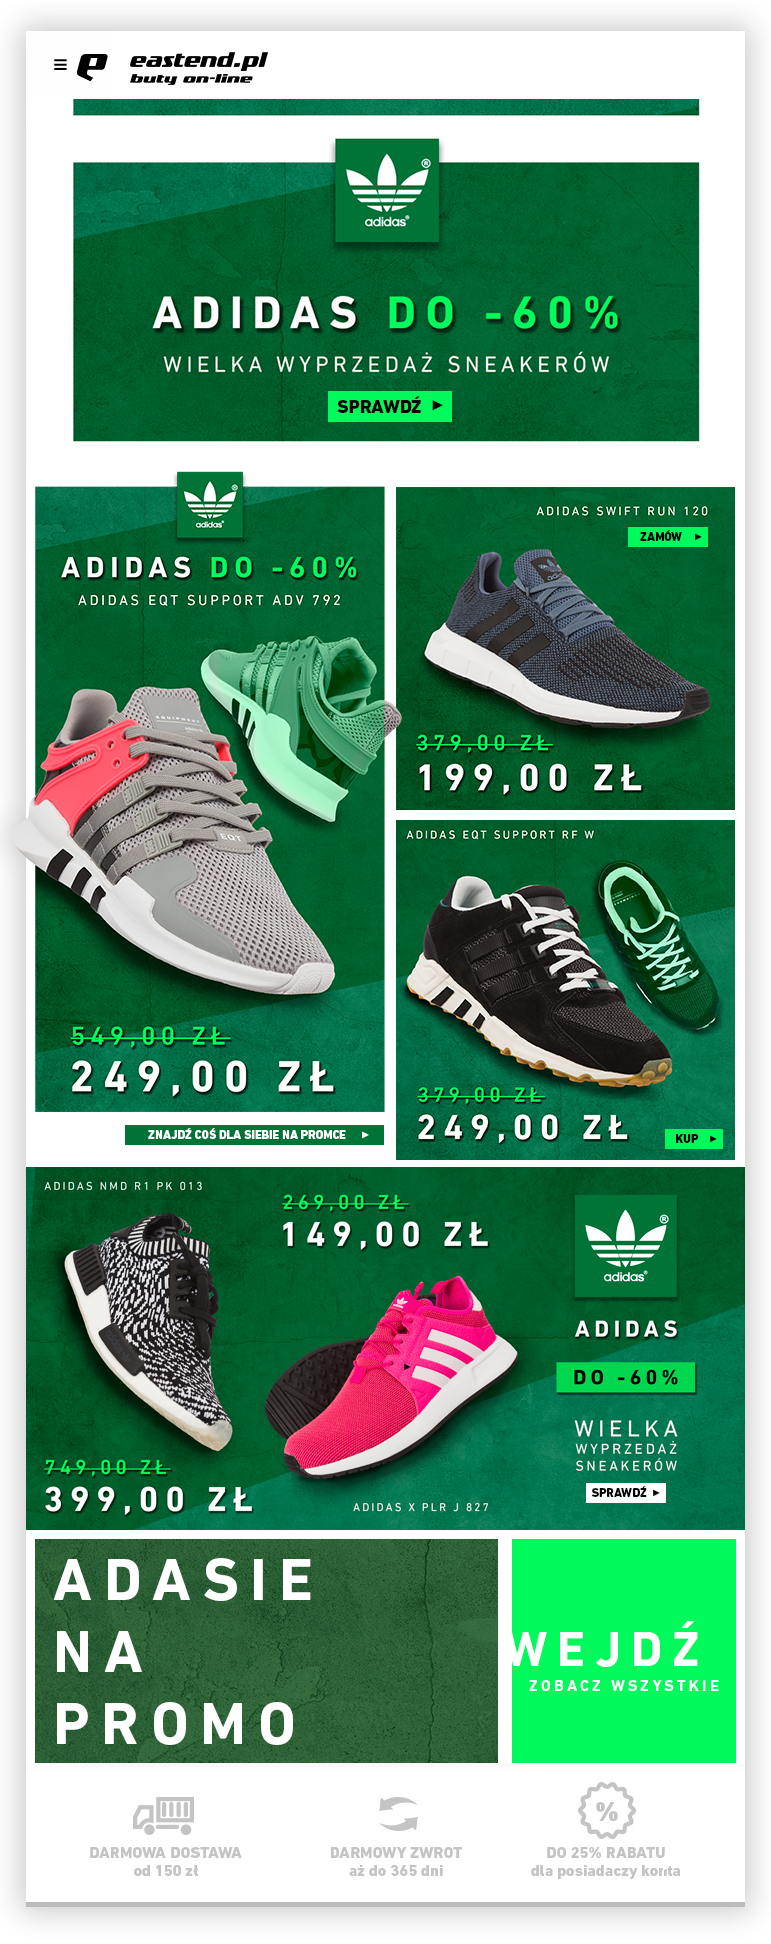 Eastend adidas marketing   campaign brand facebook ads mailing sneakers